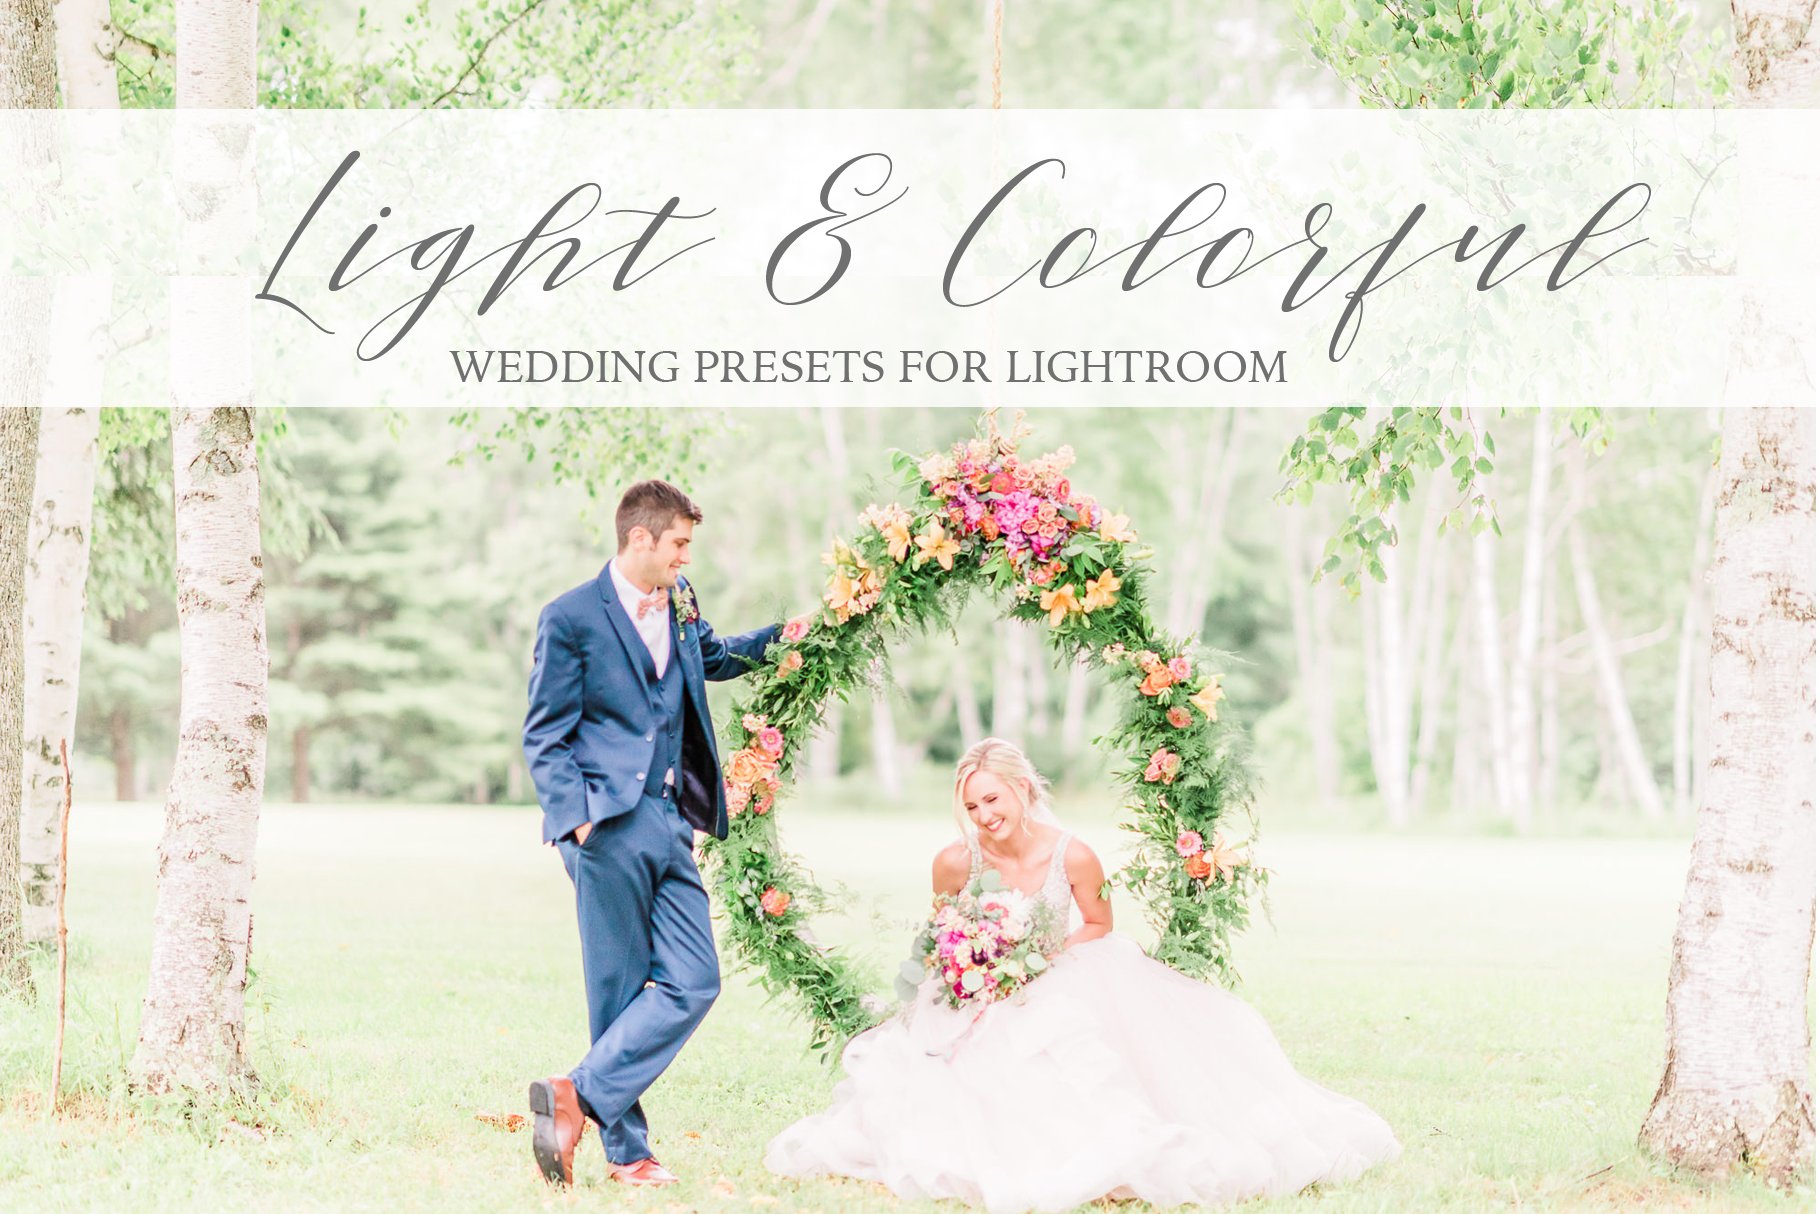 Light & Colorful Wedding Presetscover image.